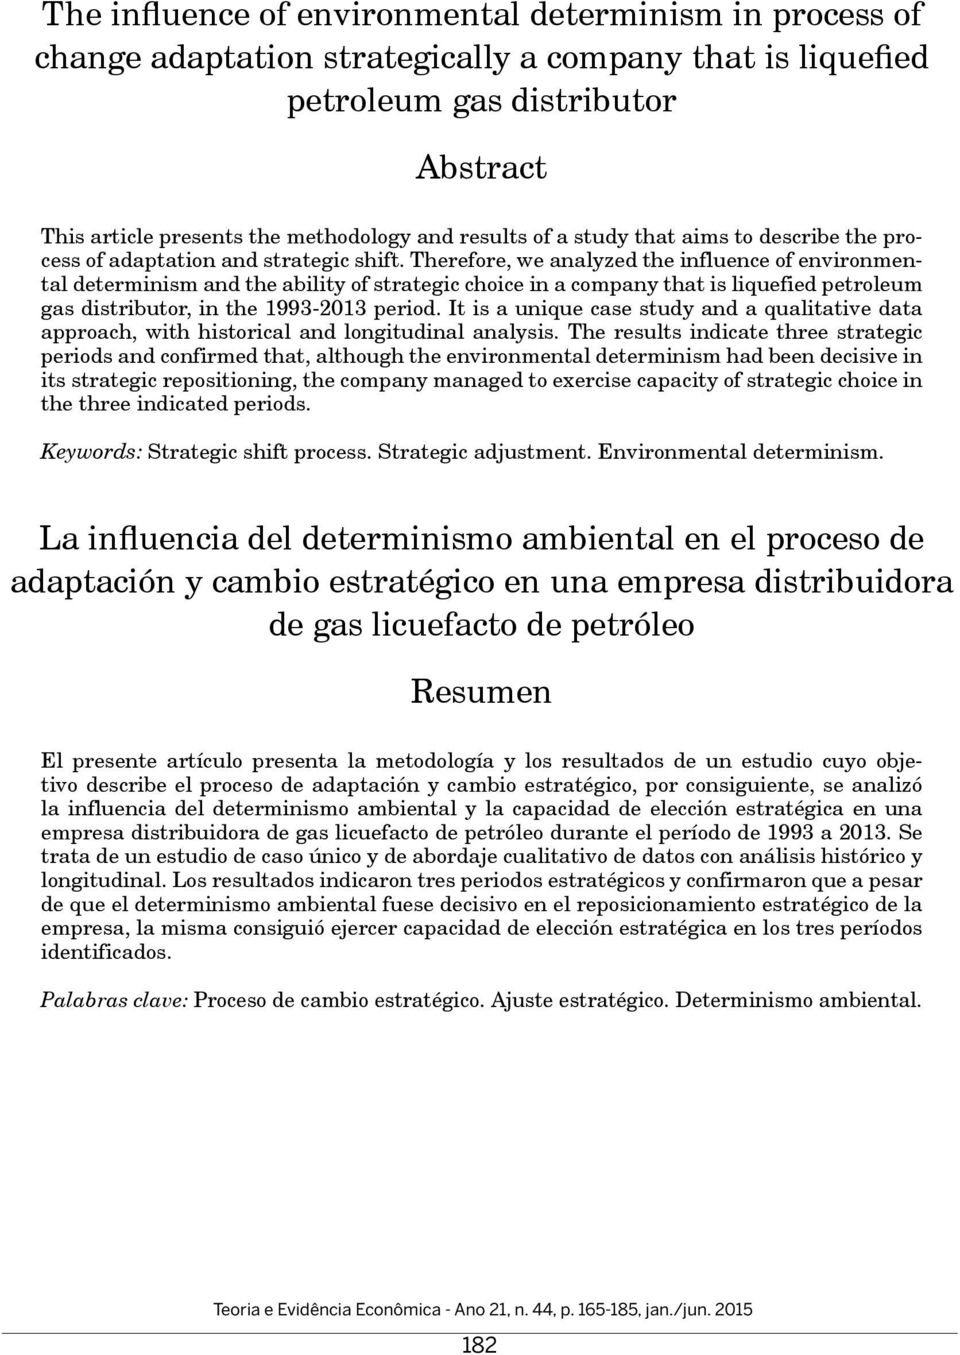 Therefore, we analyzed the influence of environmental determinism and the ability of strategic choice in a company that is liquefied petroleum gas distributor, in the 1993-2013 period.